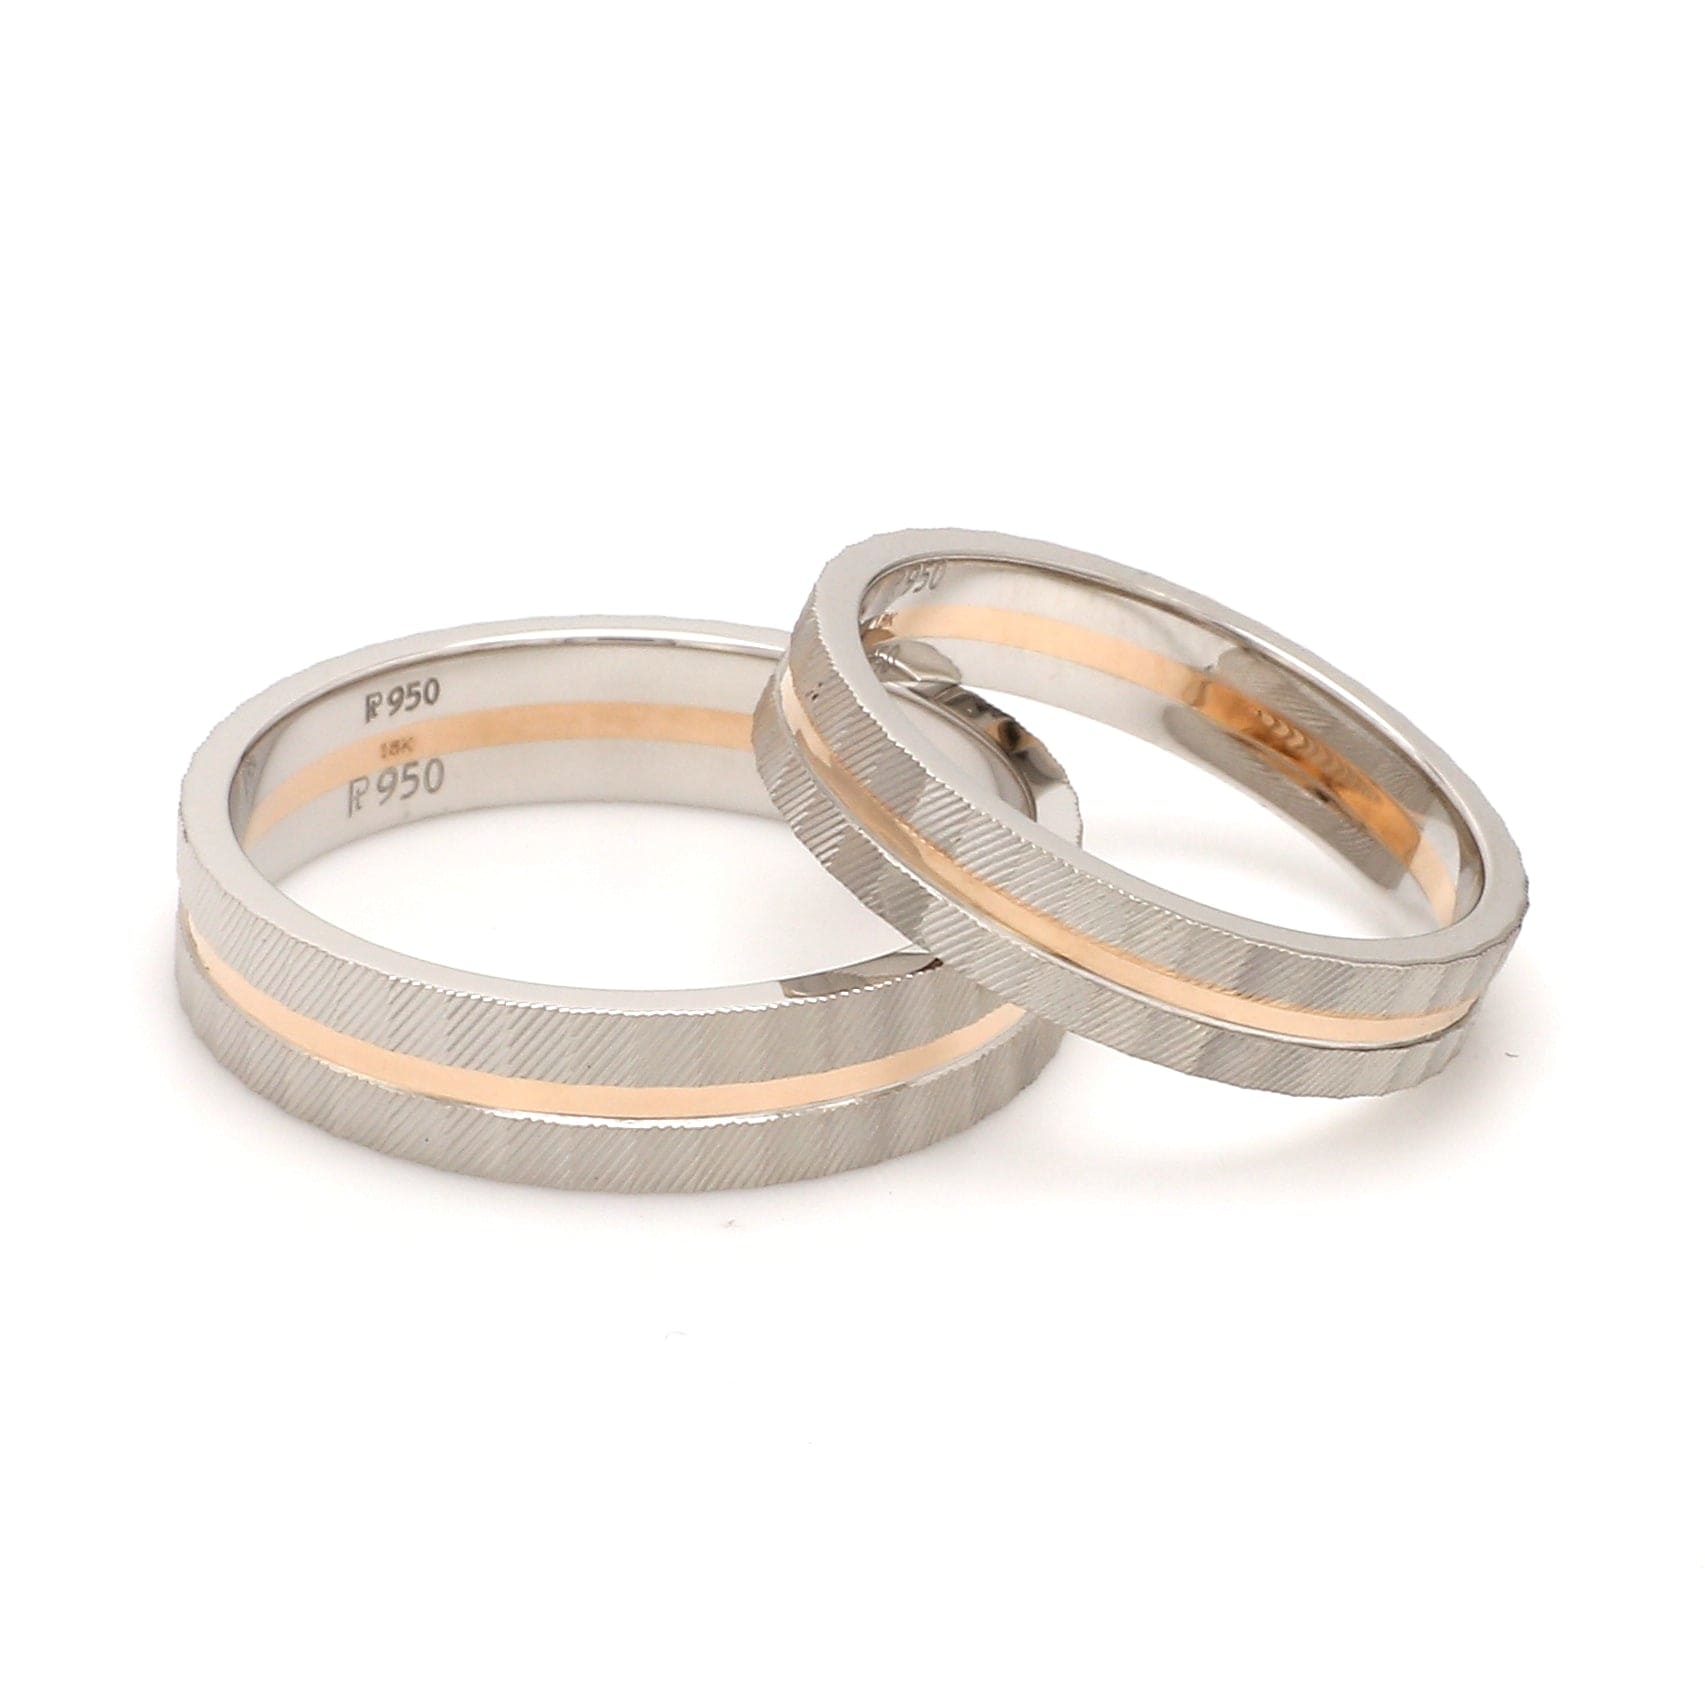 Men's yellow and white gold wedding ring with ruthenium groove -  EverettBrookes Jewellers